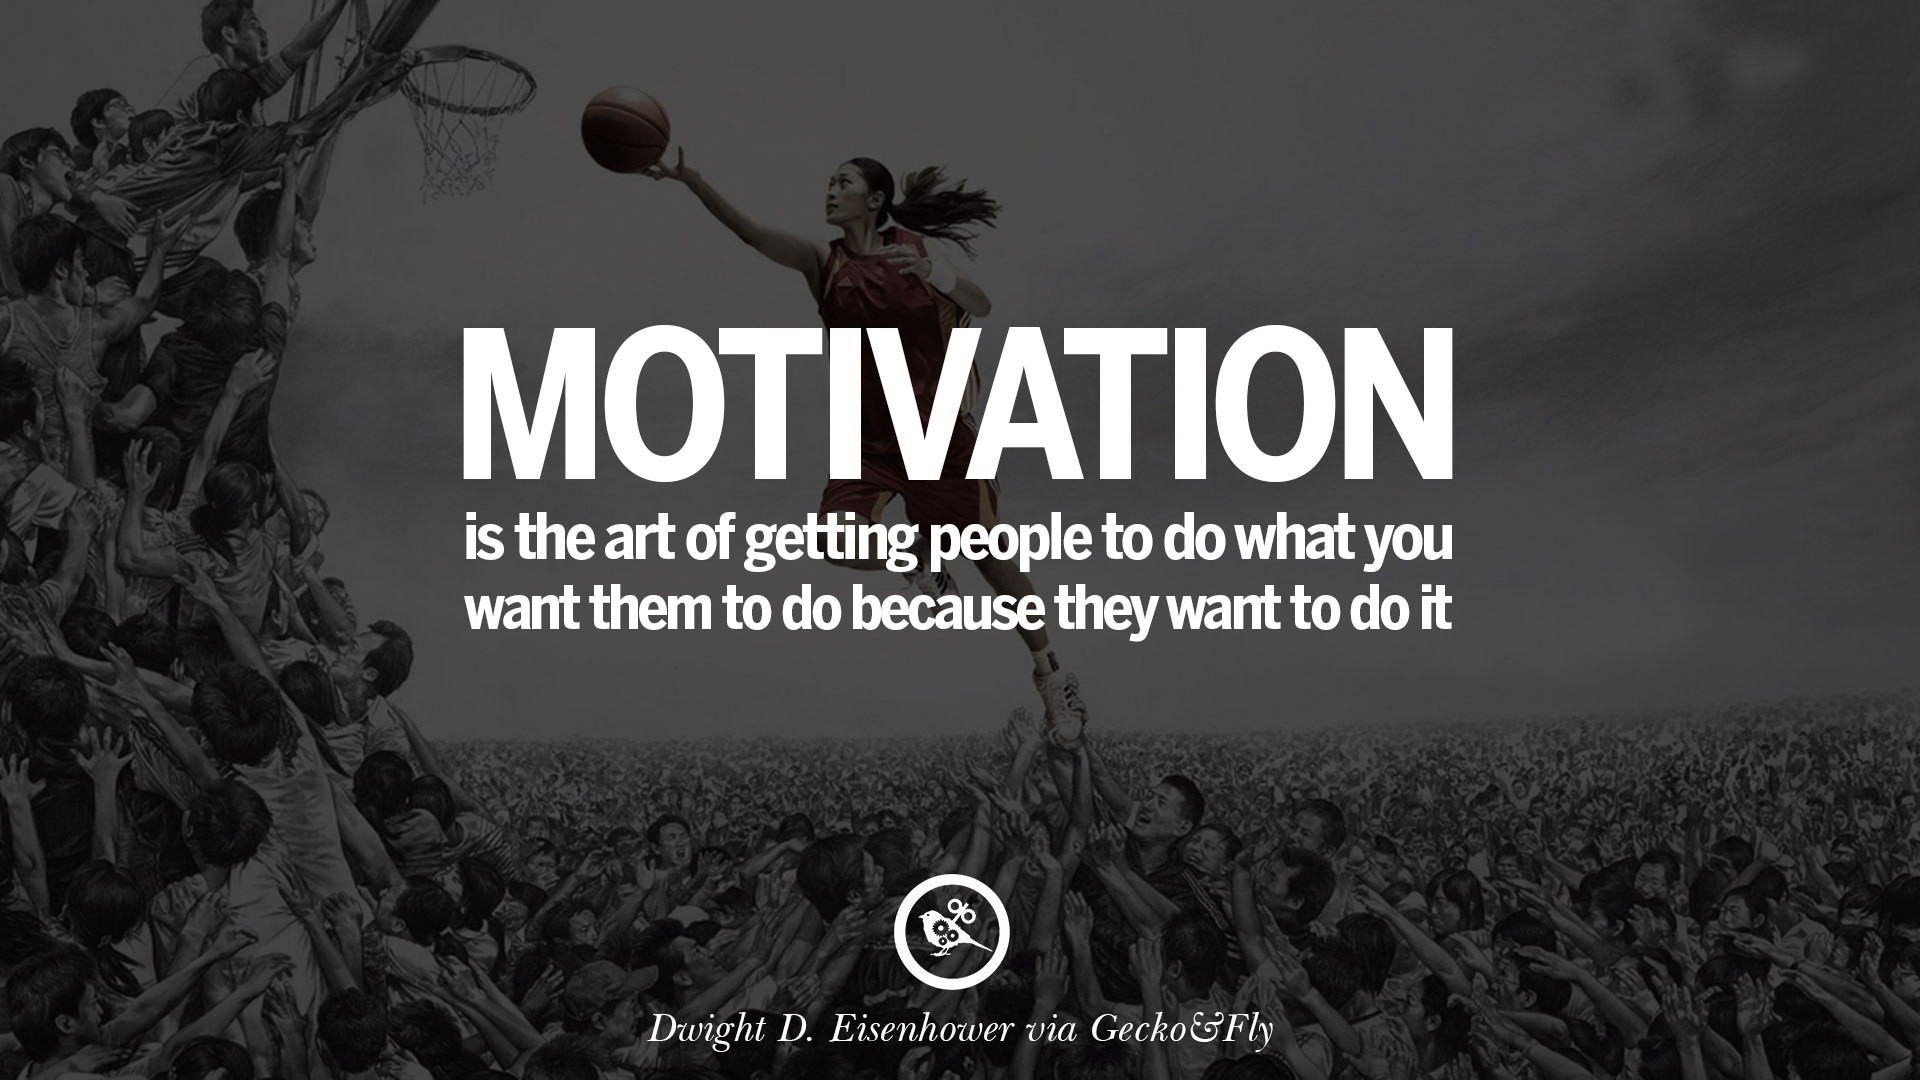 Sports Quotes Motivational
 20 Encouraging and Motivational Poster Quotes on Sports